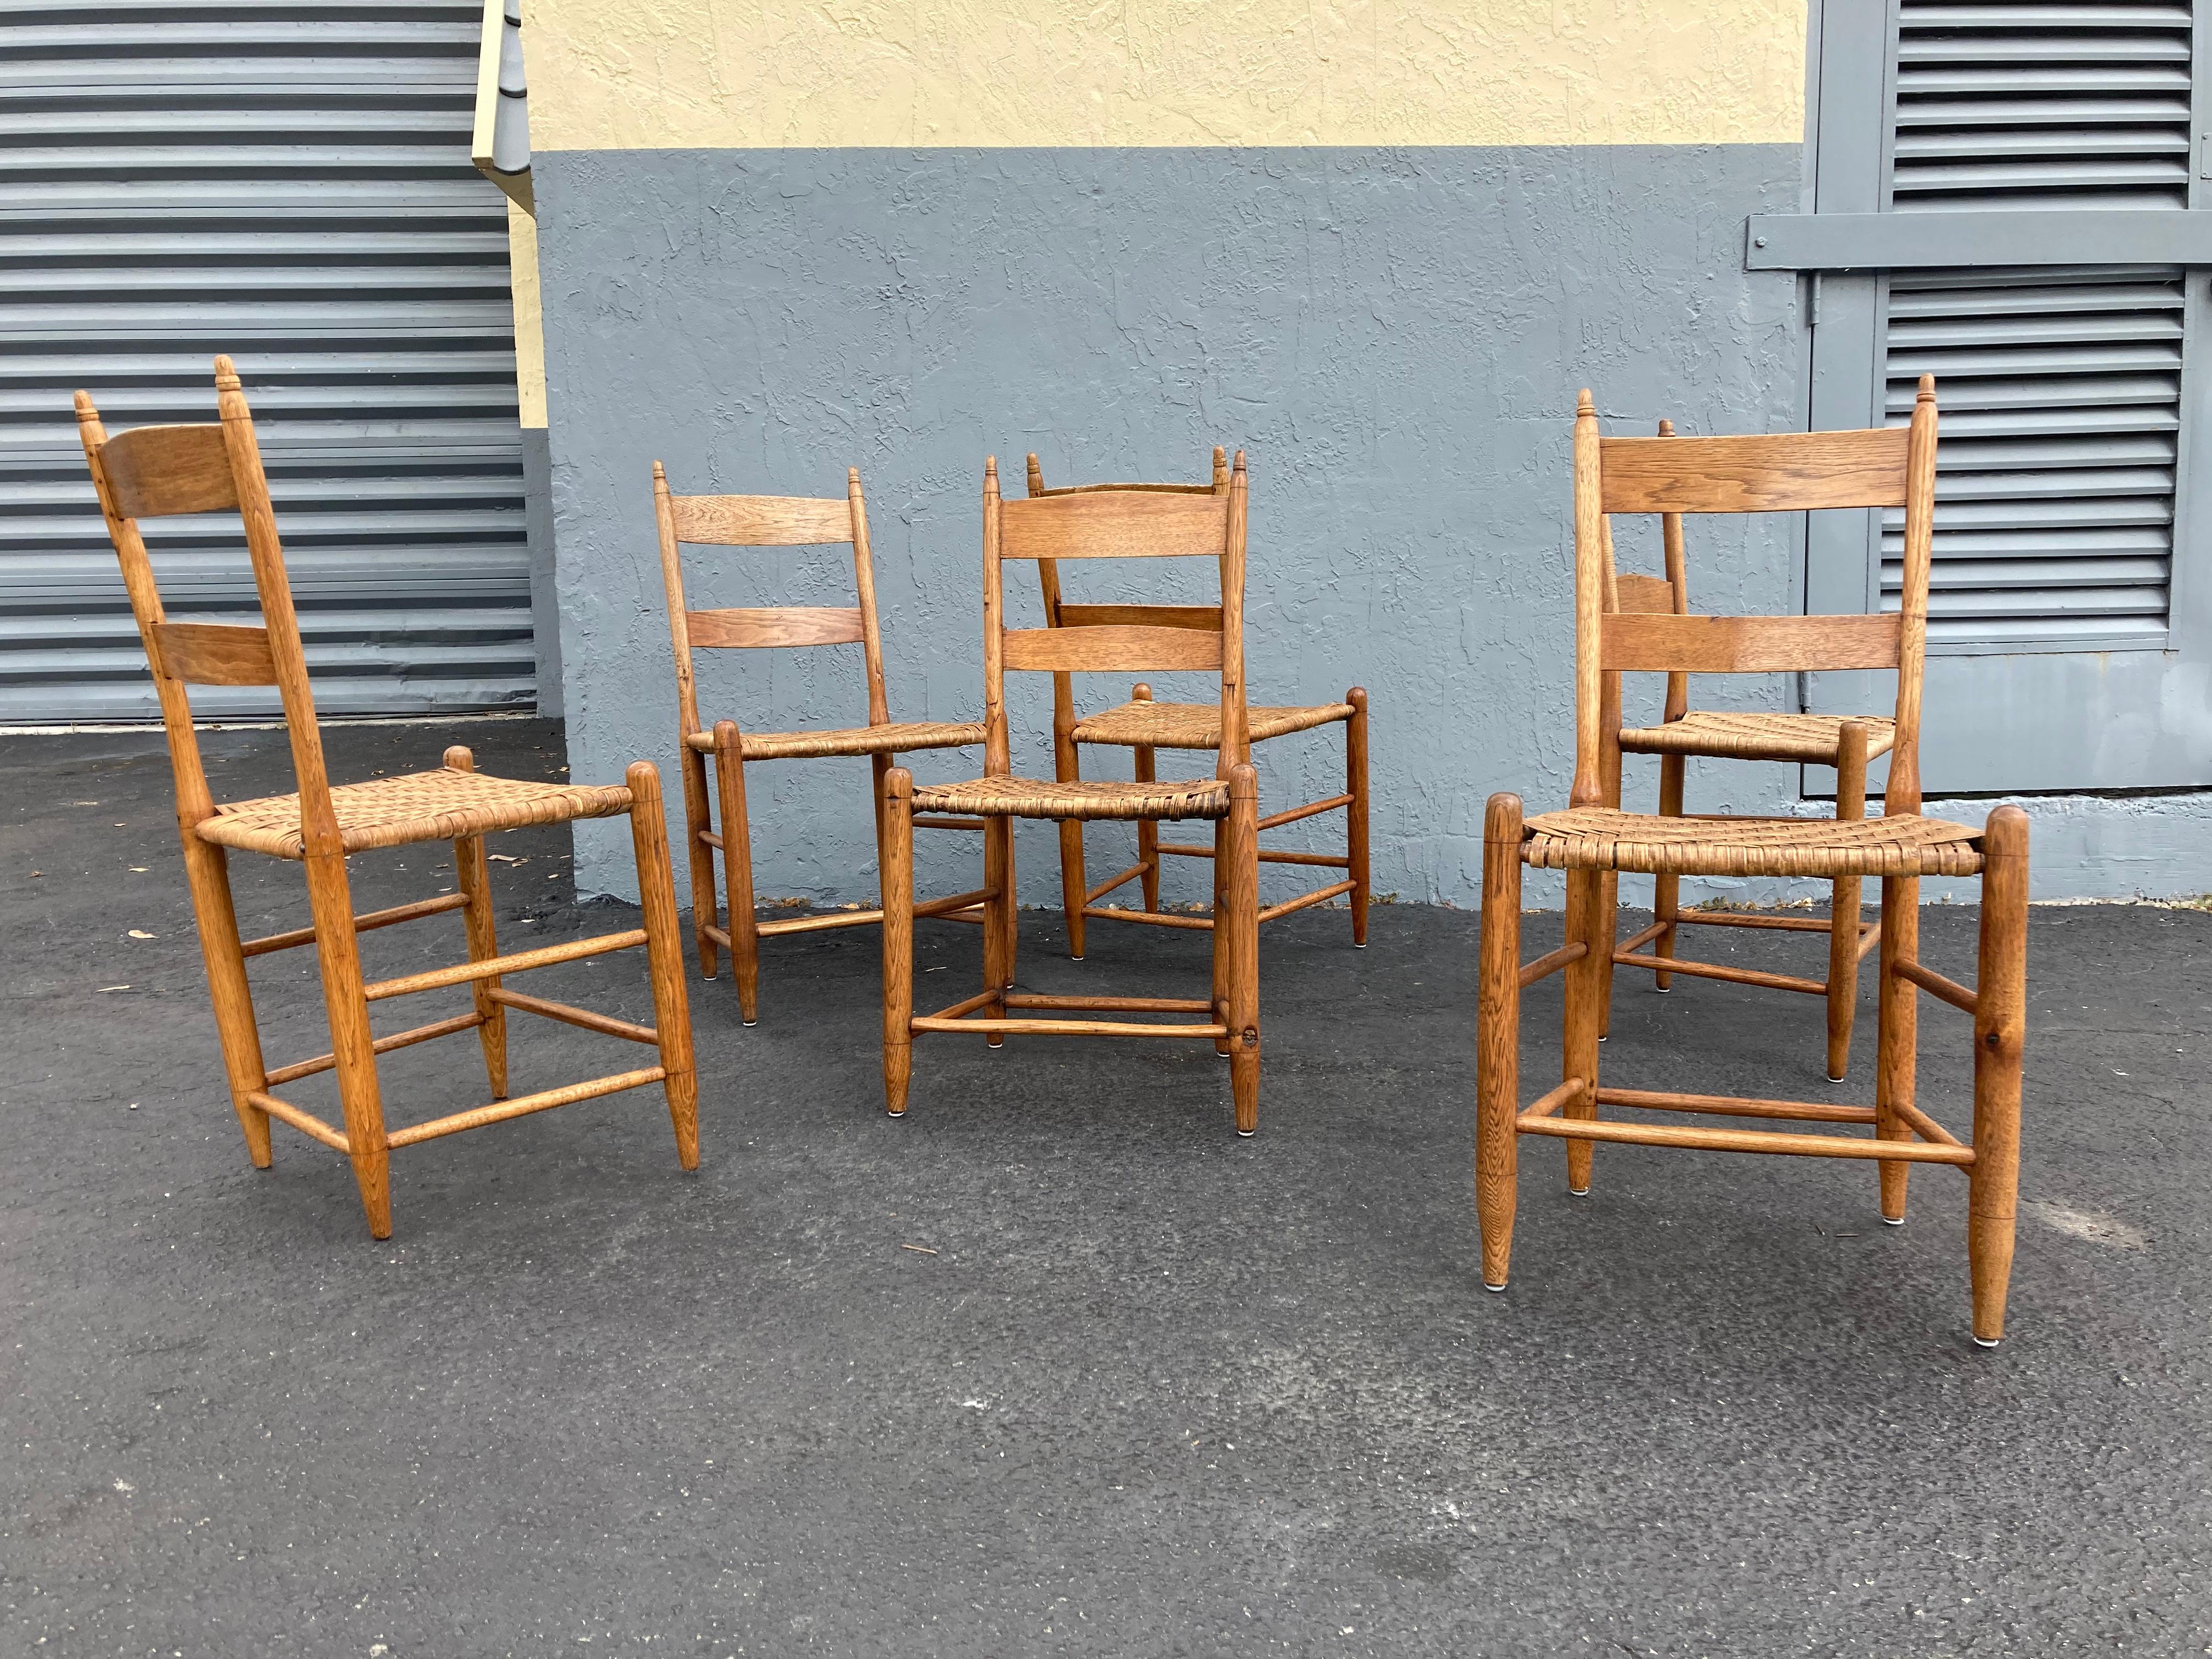 Beautiful set of six antique dining chairs, each chair is unique and a little different in size. Made in Virginia, 1880.